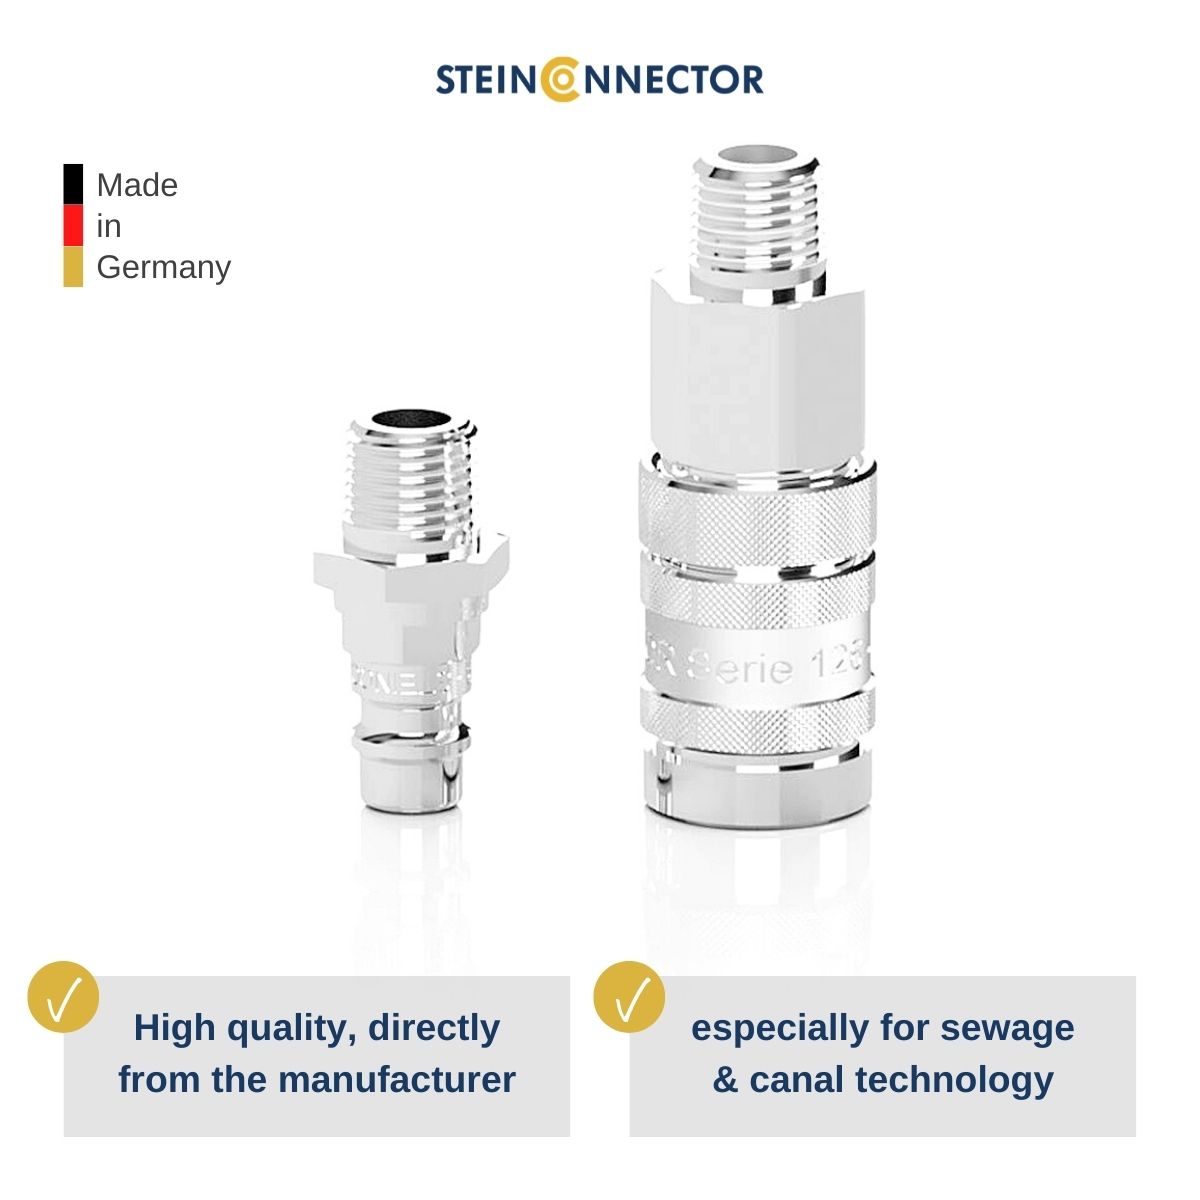 Steinconnector Professional Compressed Air, Safety, Quick and Air Couplings for Sewer and Drainage Technology - First Class Fittings in Industrial Quality - Buy Directly from the German Manufacturer